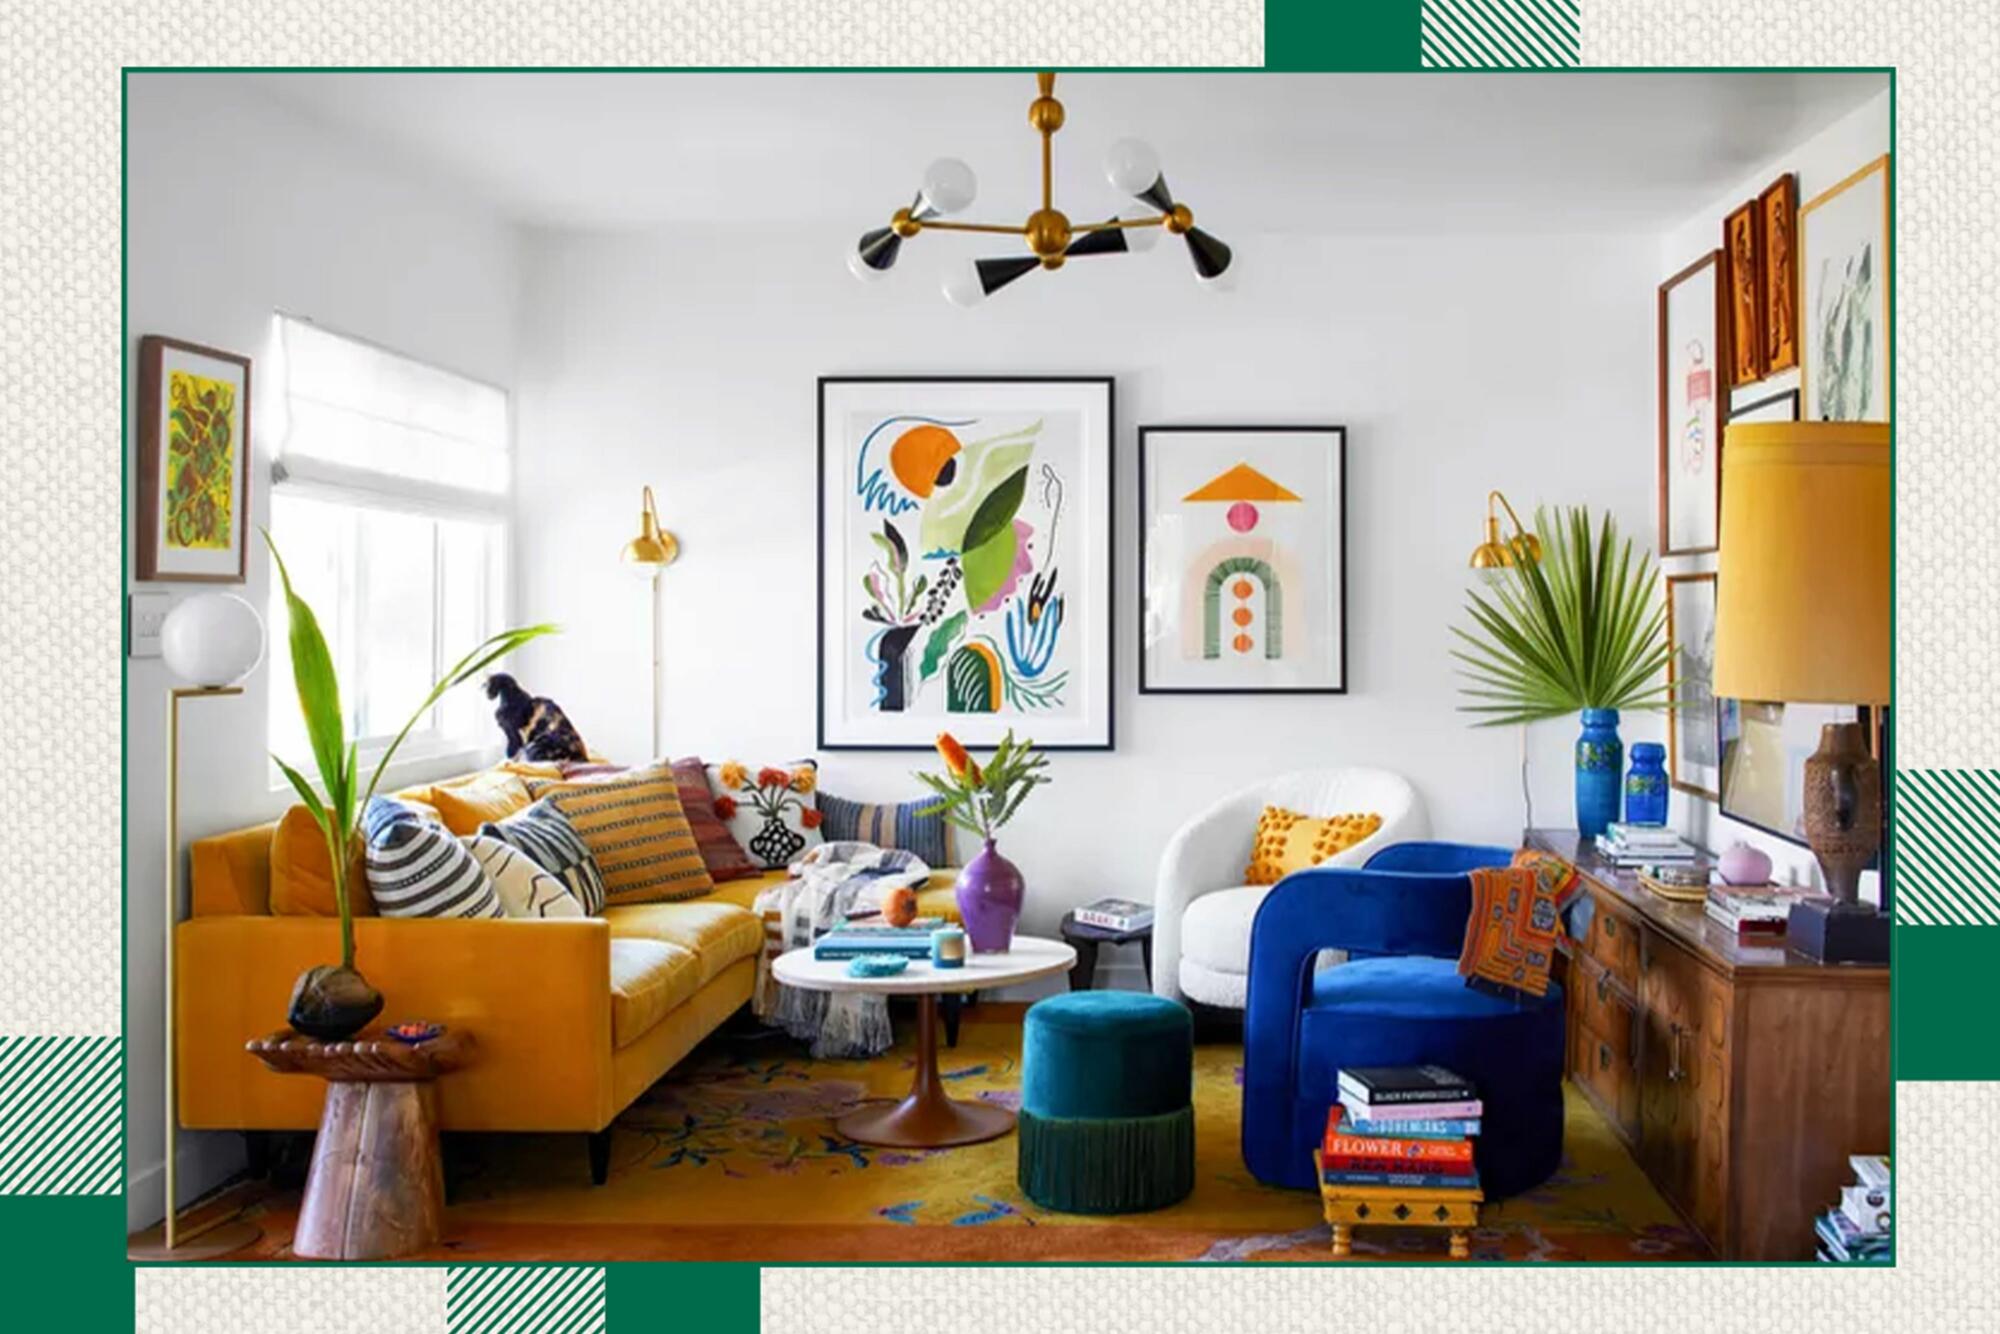 Colorful eclectic living room interior design.